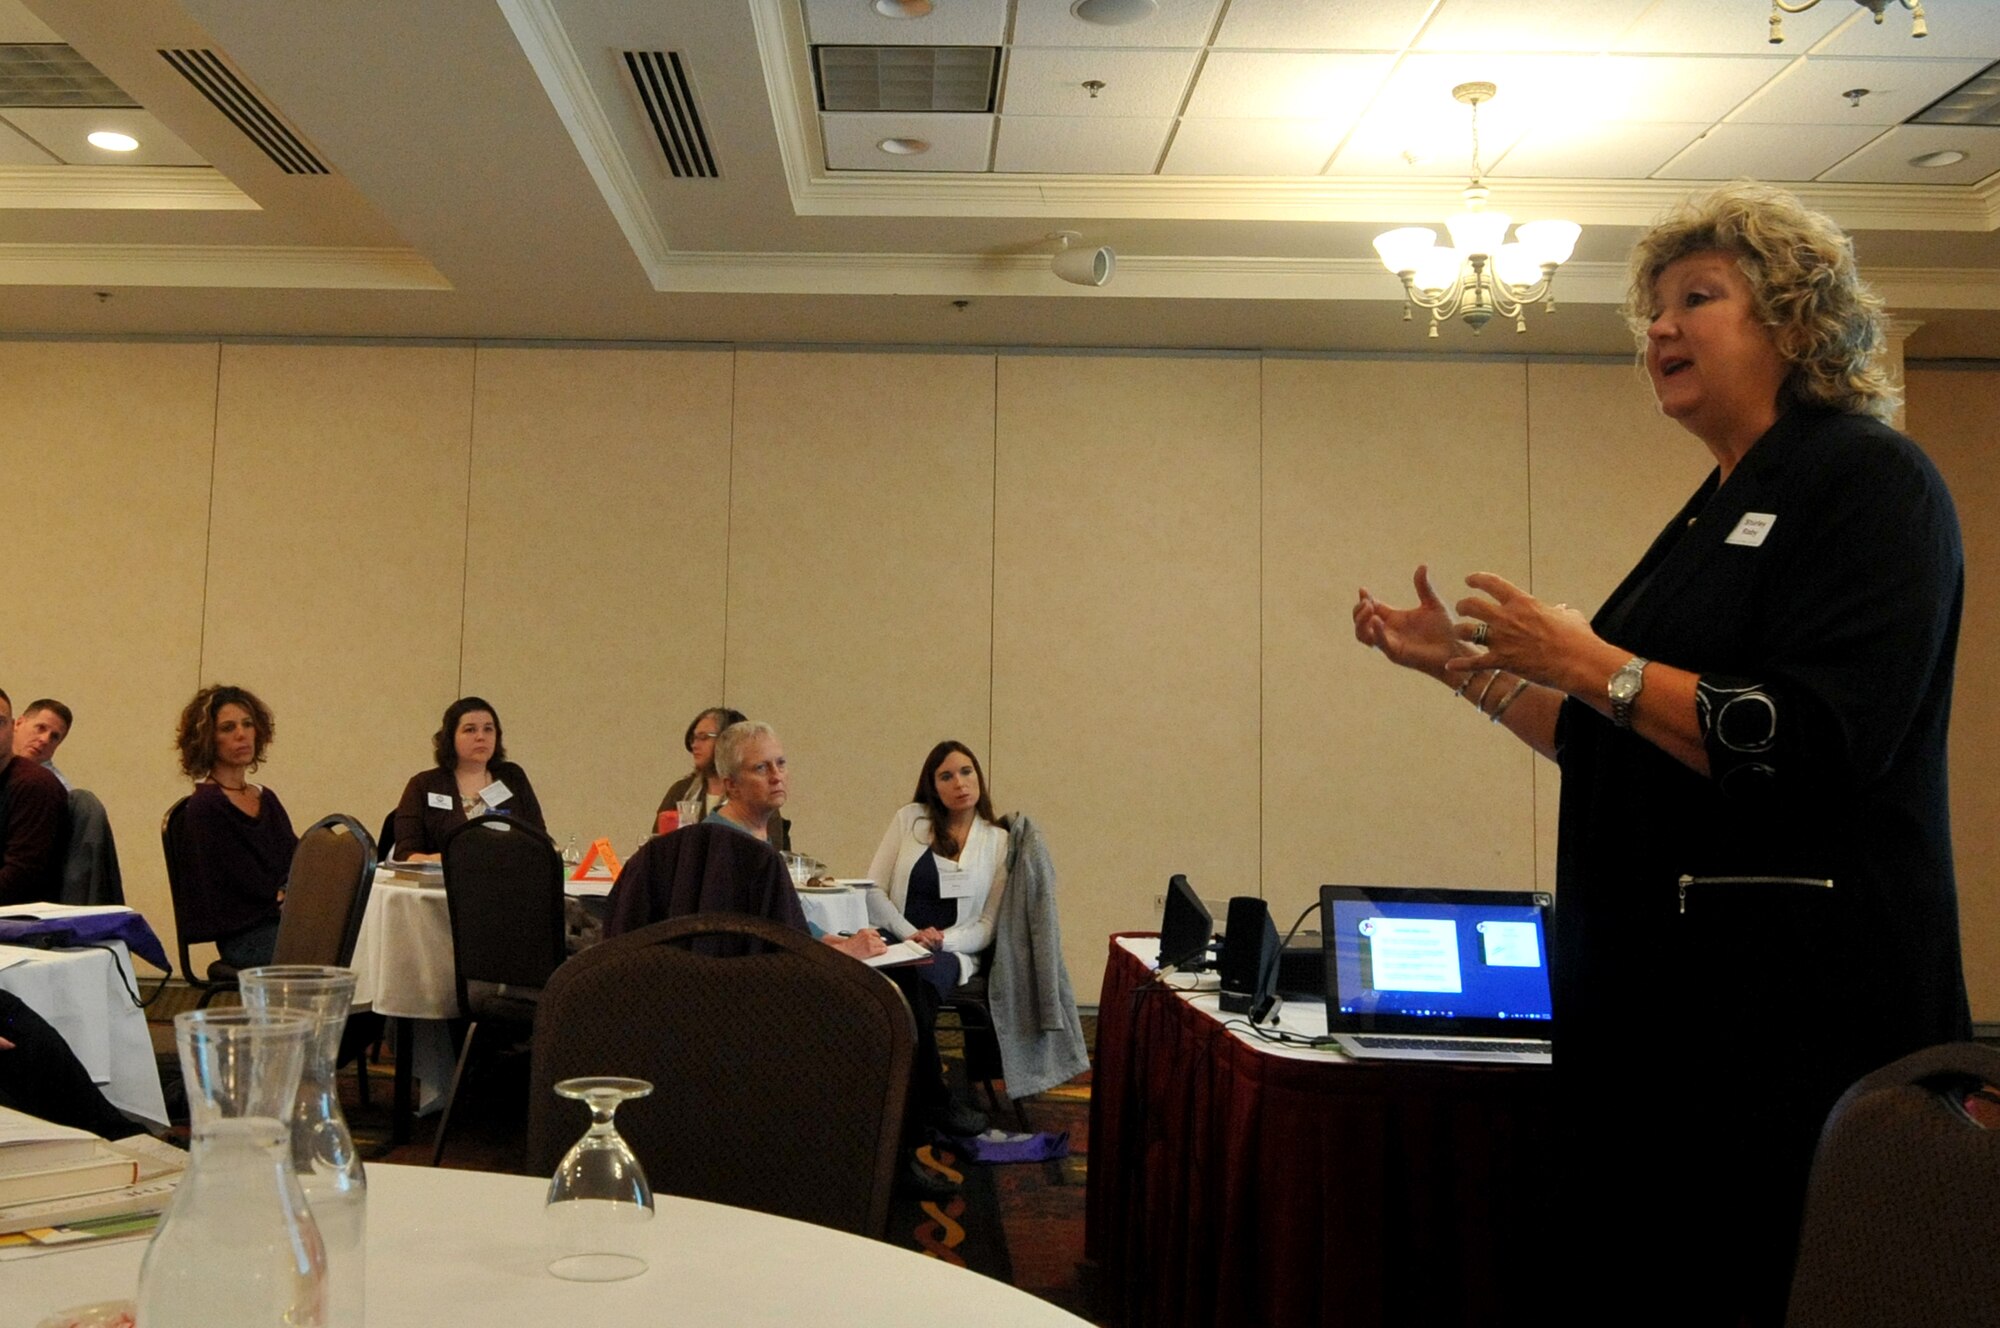 Shirley Raby from the Military Child Education Coalition speaks to a group of childcare and education professionals from across the region who gathered Nov. 3, 2015 in Grand Forks, North Dakota for a Helping Military Children Discover their S.P.A.R.C. (Strength, Potential, Aspirations, Resourcefulness and Confidence) workshop. The event was hosted by the Military Child Education Coalition in cooperation with the Grand Forks Air Force Base school liaison office. (U.S. Air Force photo/Staff Sgt. Susan L. Davis)